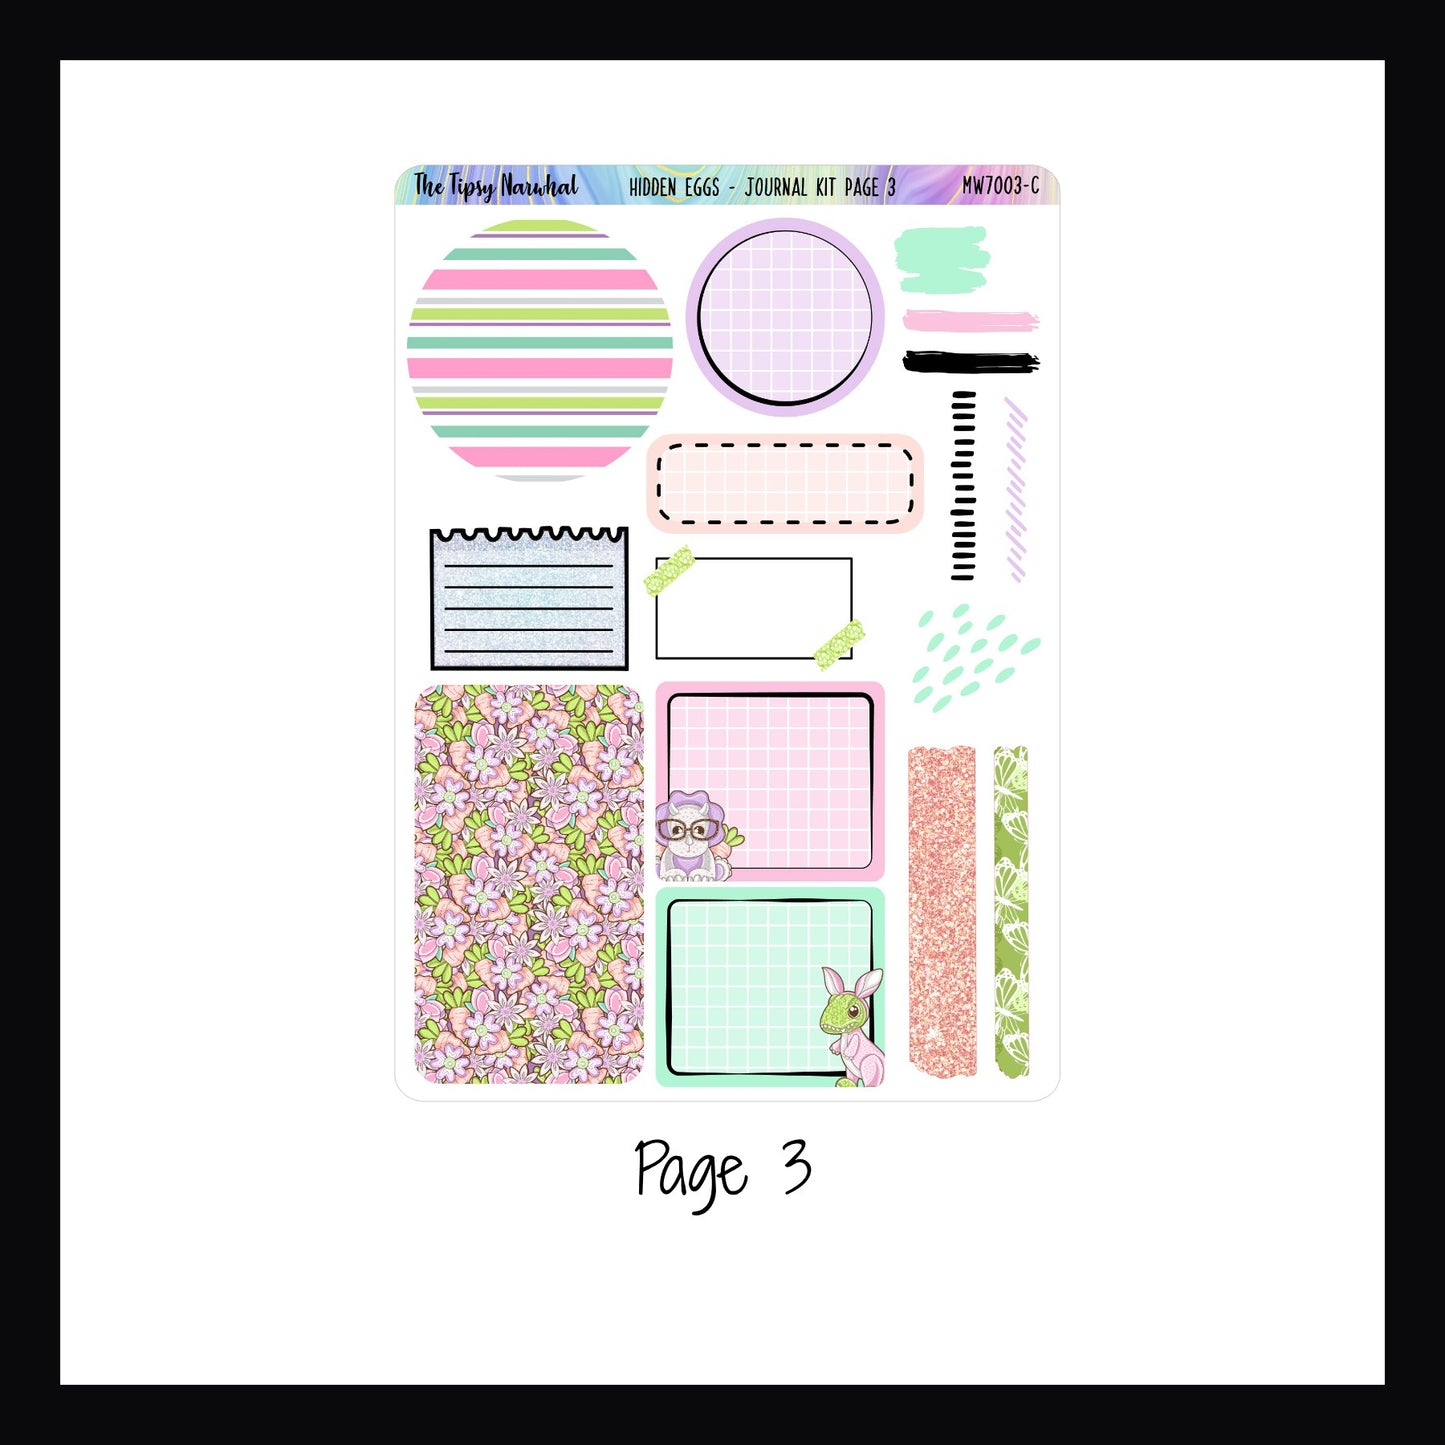 Hidden Eggs Journal Kit Page 3.  Page 3 features decorative and writable shape stickers, washi strips, and notes stickers. 